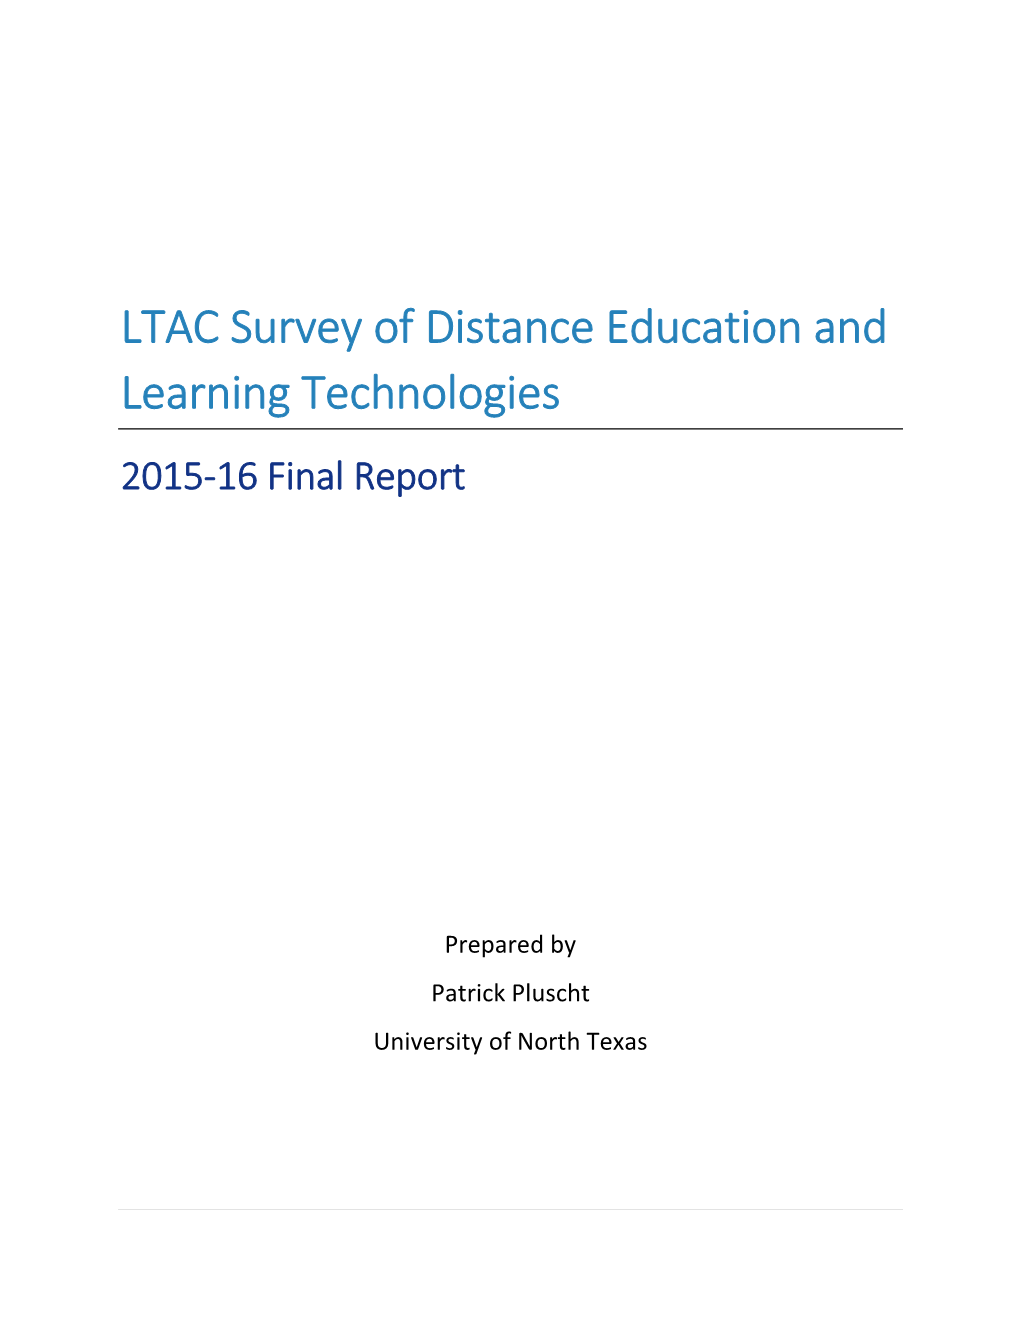 Survey of Distance Education and Learning Technologies 2015-16 Final Report